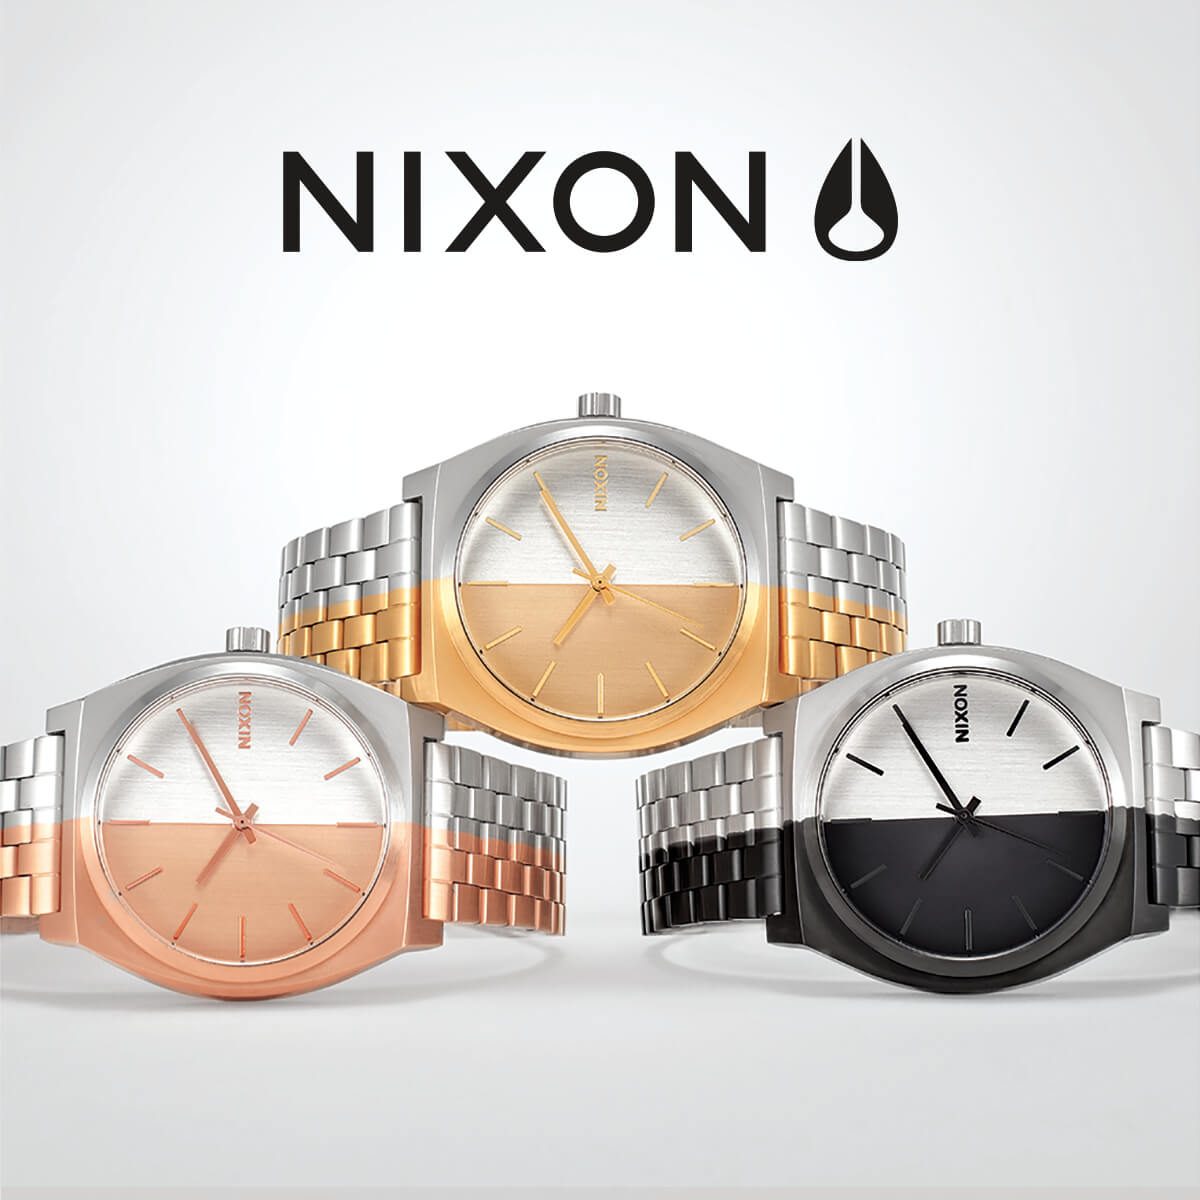 NEW ARRIVAL NIXON WATCHES MAKE THE PERFECT GIFT - SHOP NOW